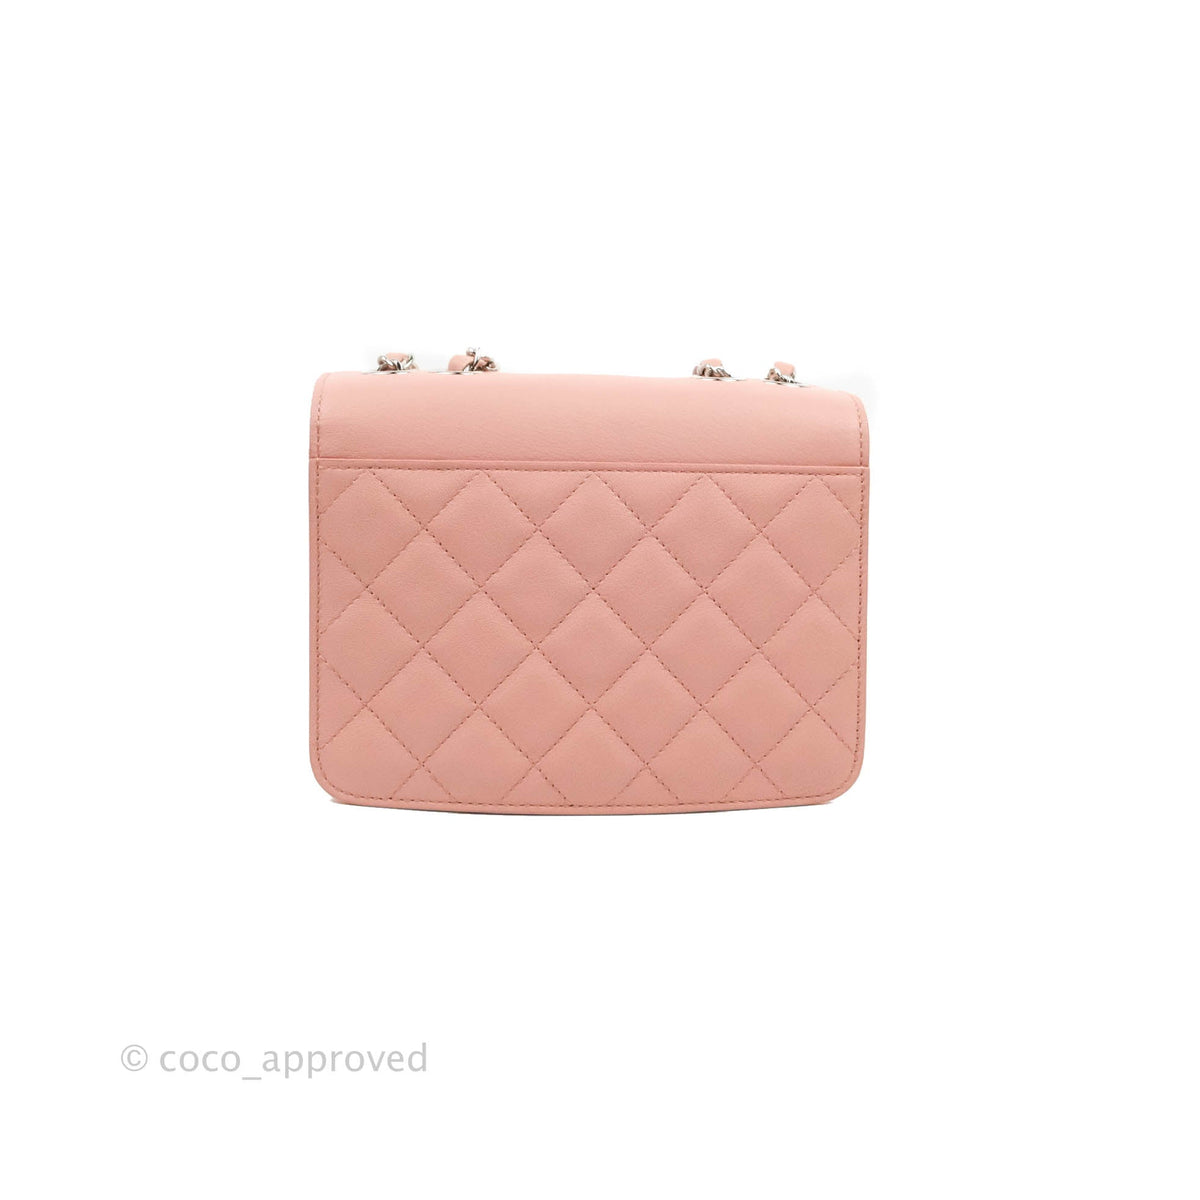 CHANEL Small Coin Purse Pink Caviar Light Gold Hardware 2018